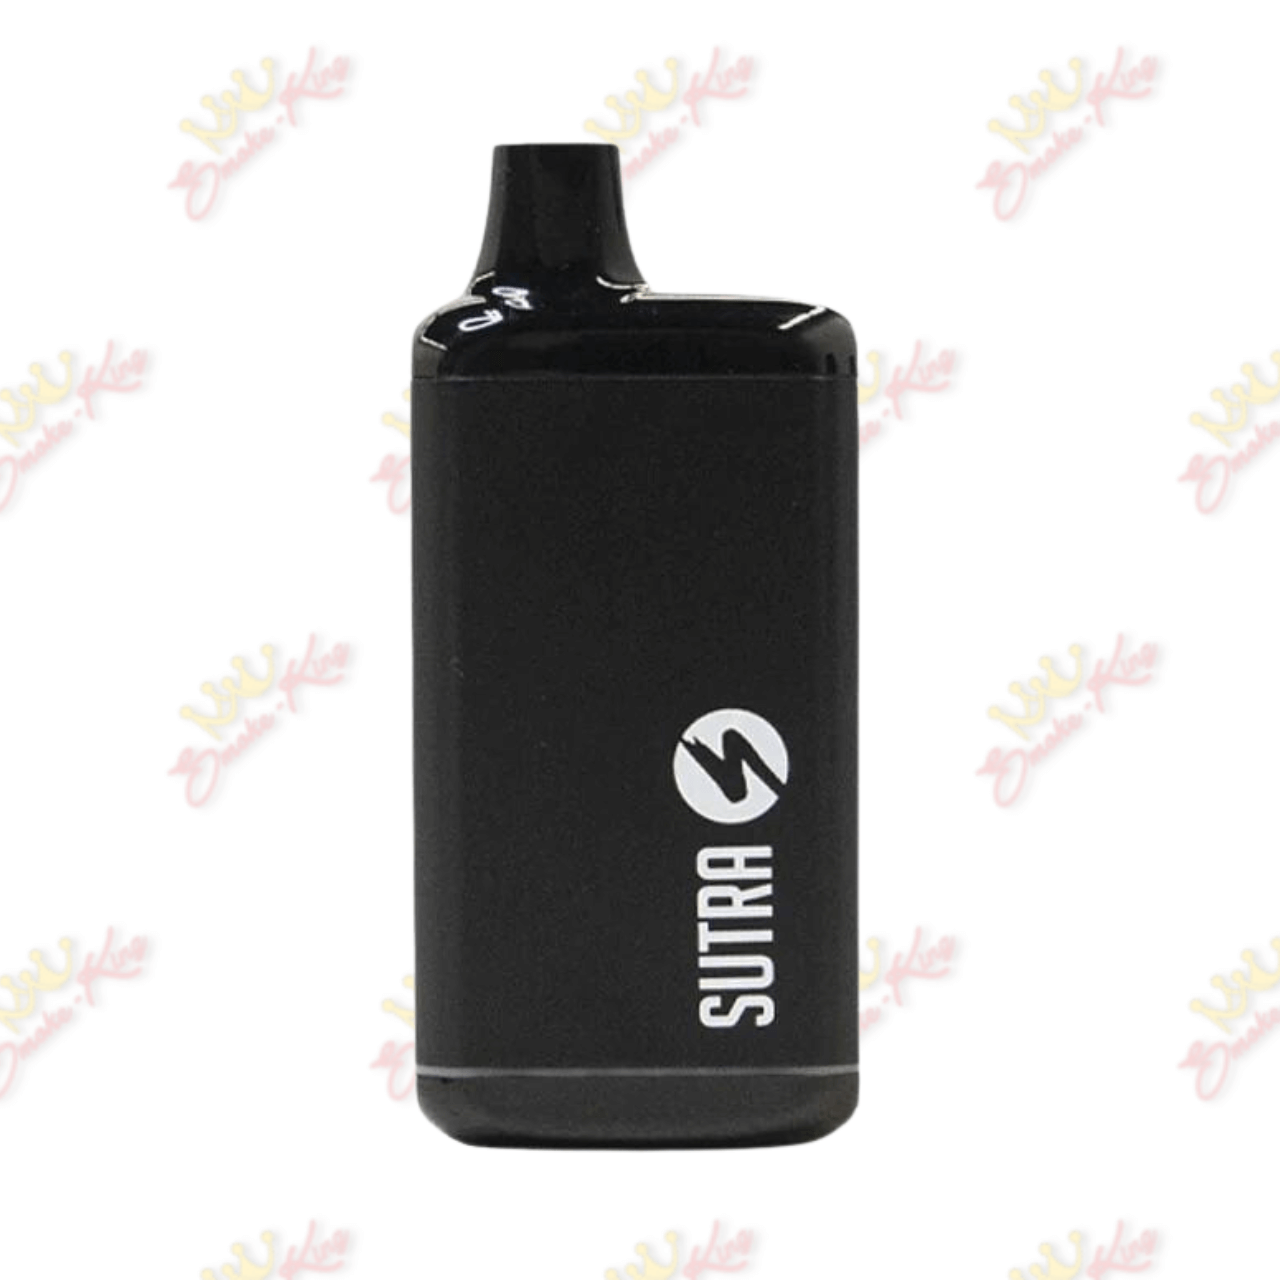 Sutra Black Sutra Silo Pro Discreet Battery Sutra Silo Pro Discreet Battery | 510 Cartridge Battery | Smoke King